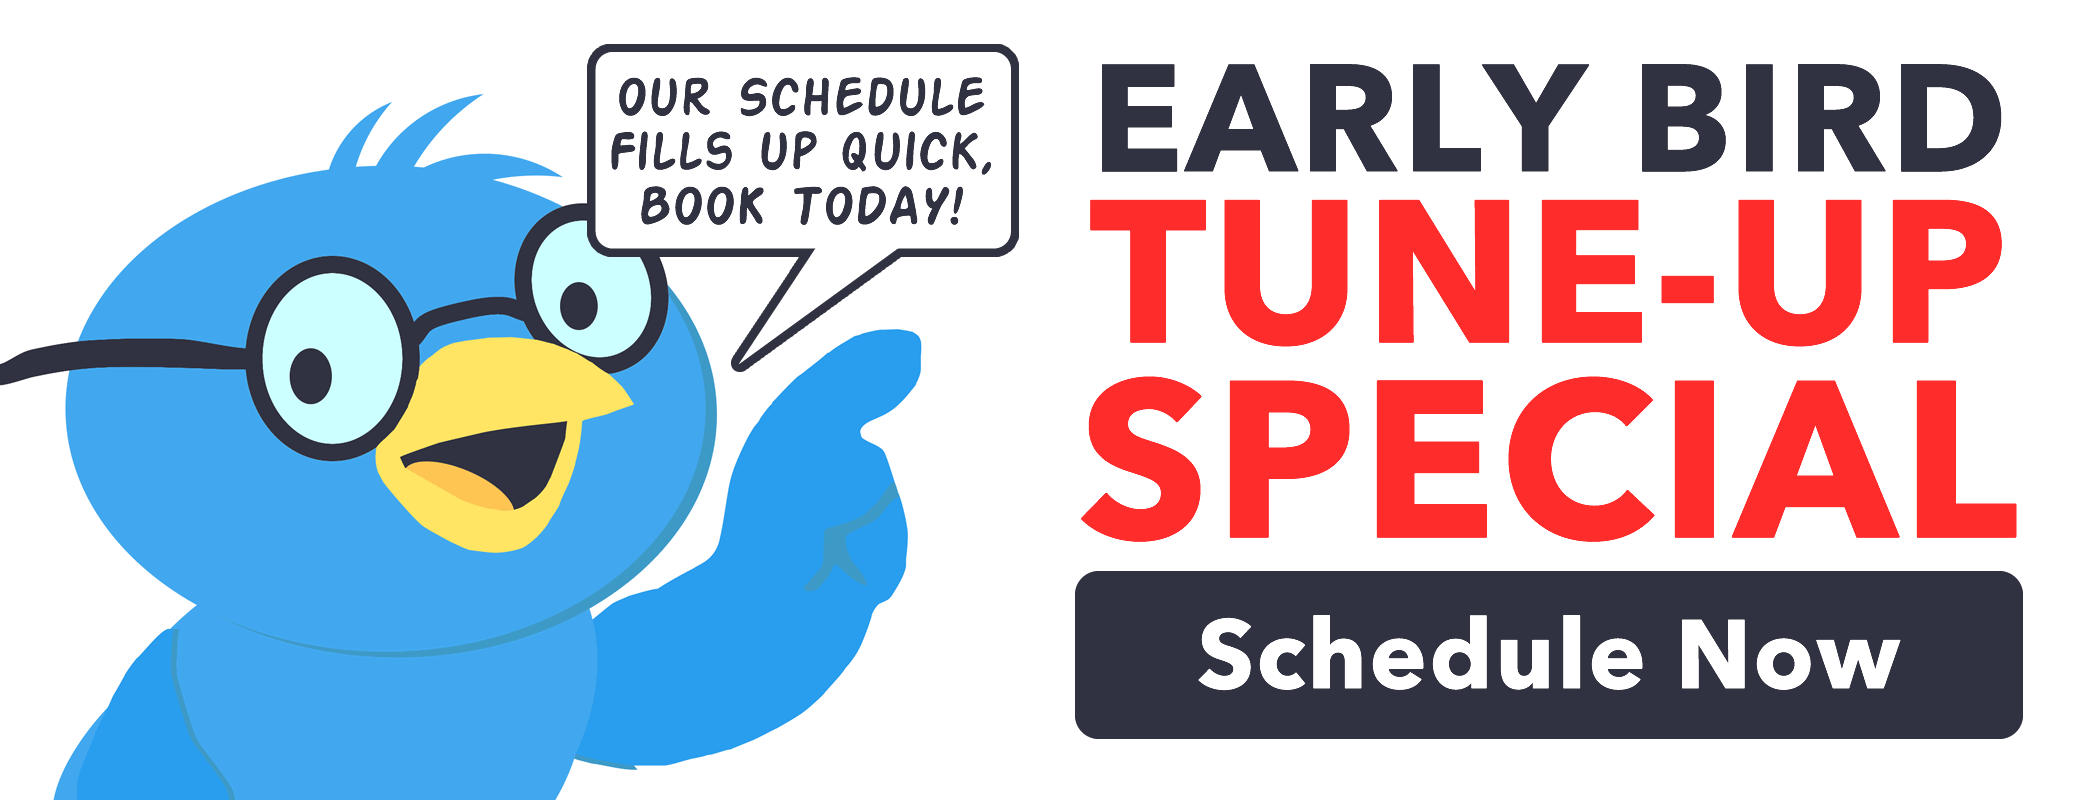 Book your Tune-Ups early to guarantee a good spot. We get bombarded with requests in September. Do not wait, lock in a time you want now! $35 OFF Early Bird Tune-Up Special.